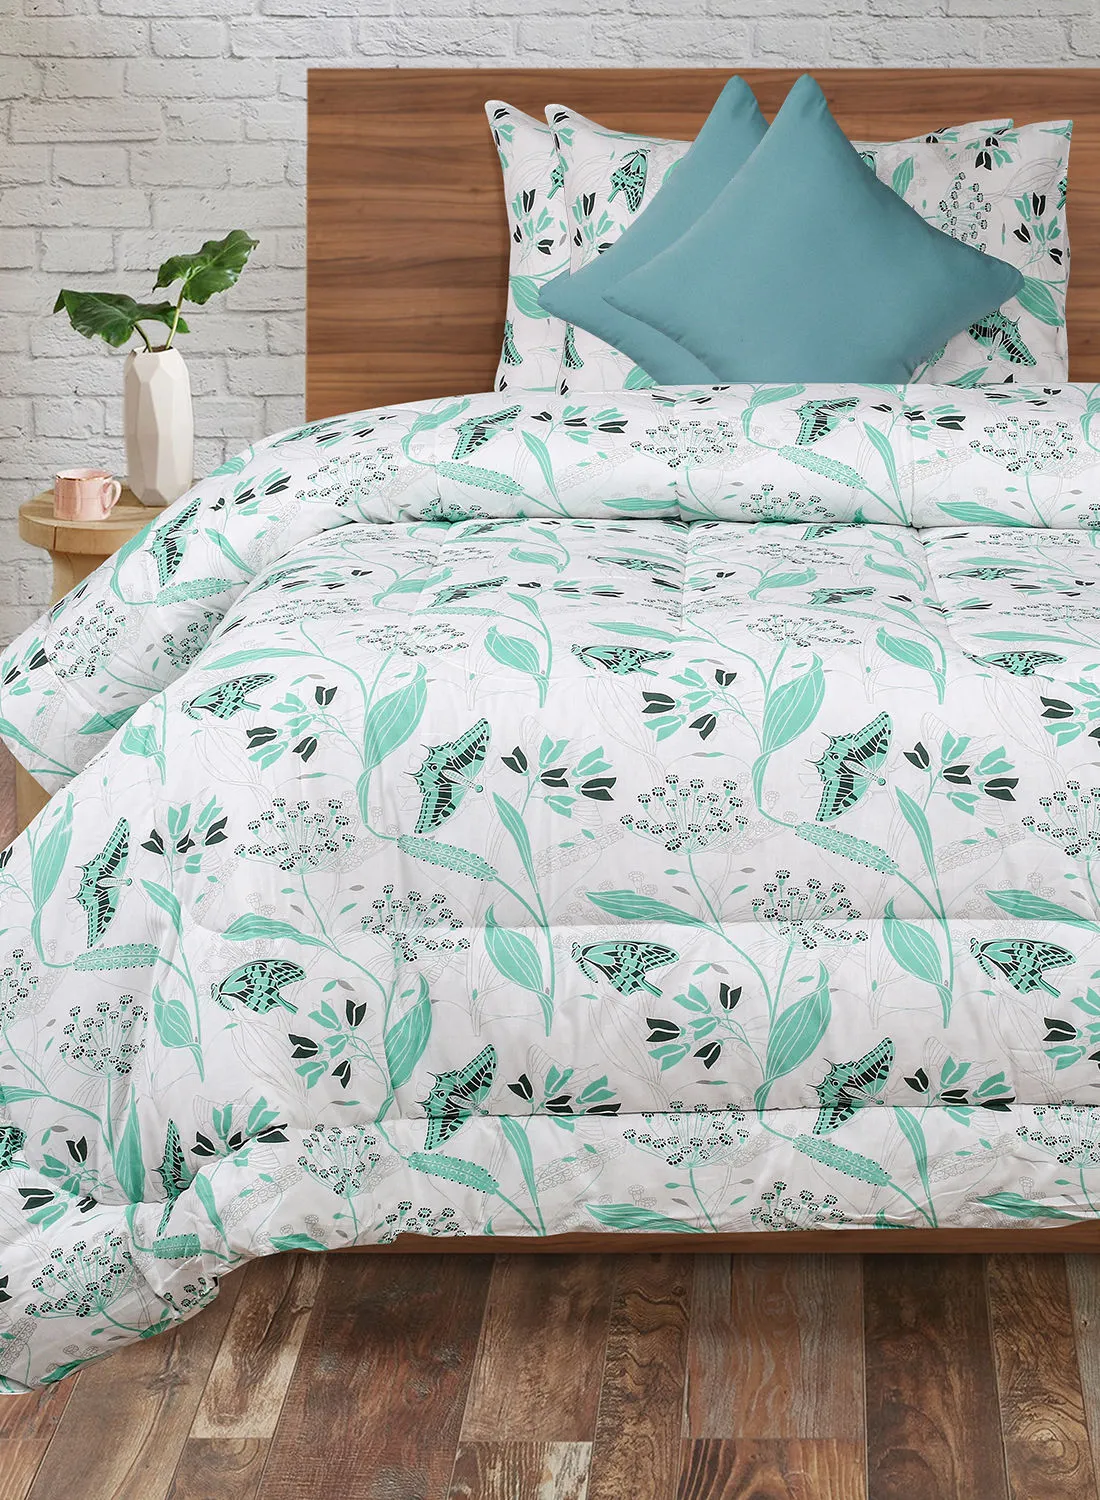 Amal Comforter Set King Size All Season Everyday Use Bedding Set 100% Cotton 5 Pieces 1 Comforter 2 Pillow Covers 2 Cushion Covers White/Teal/Black